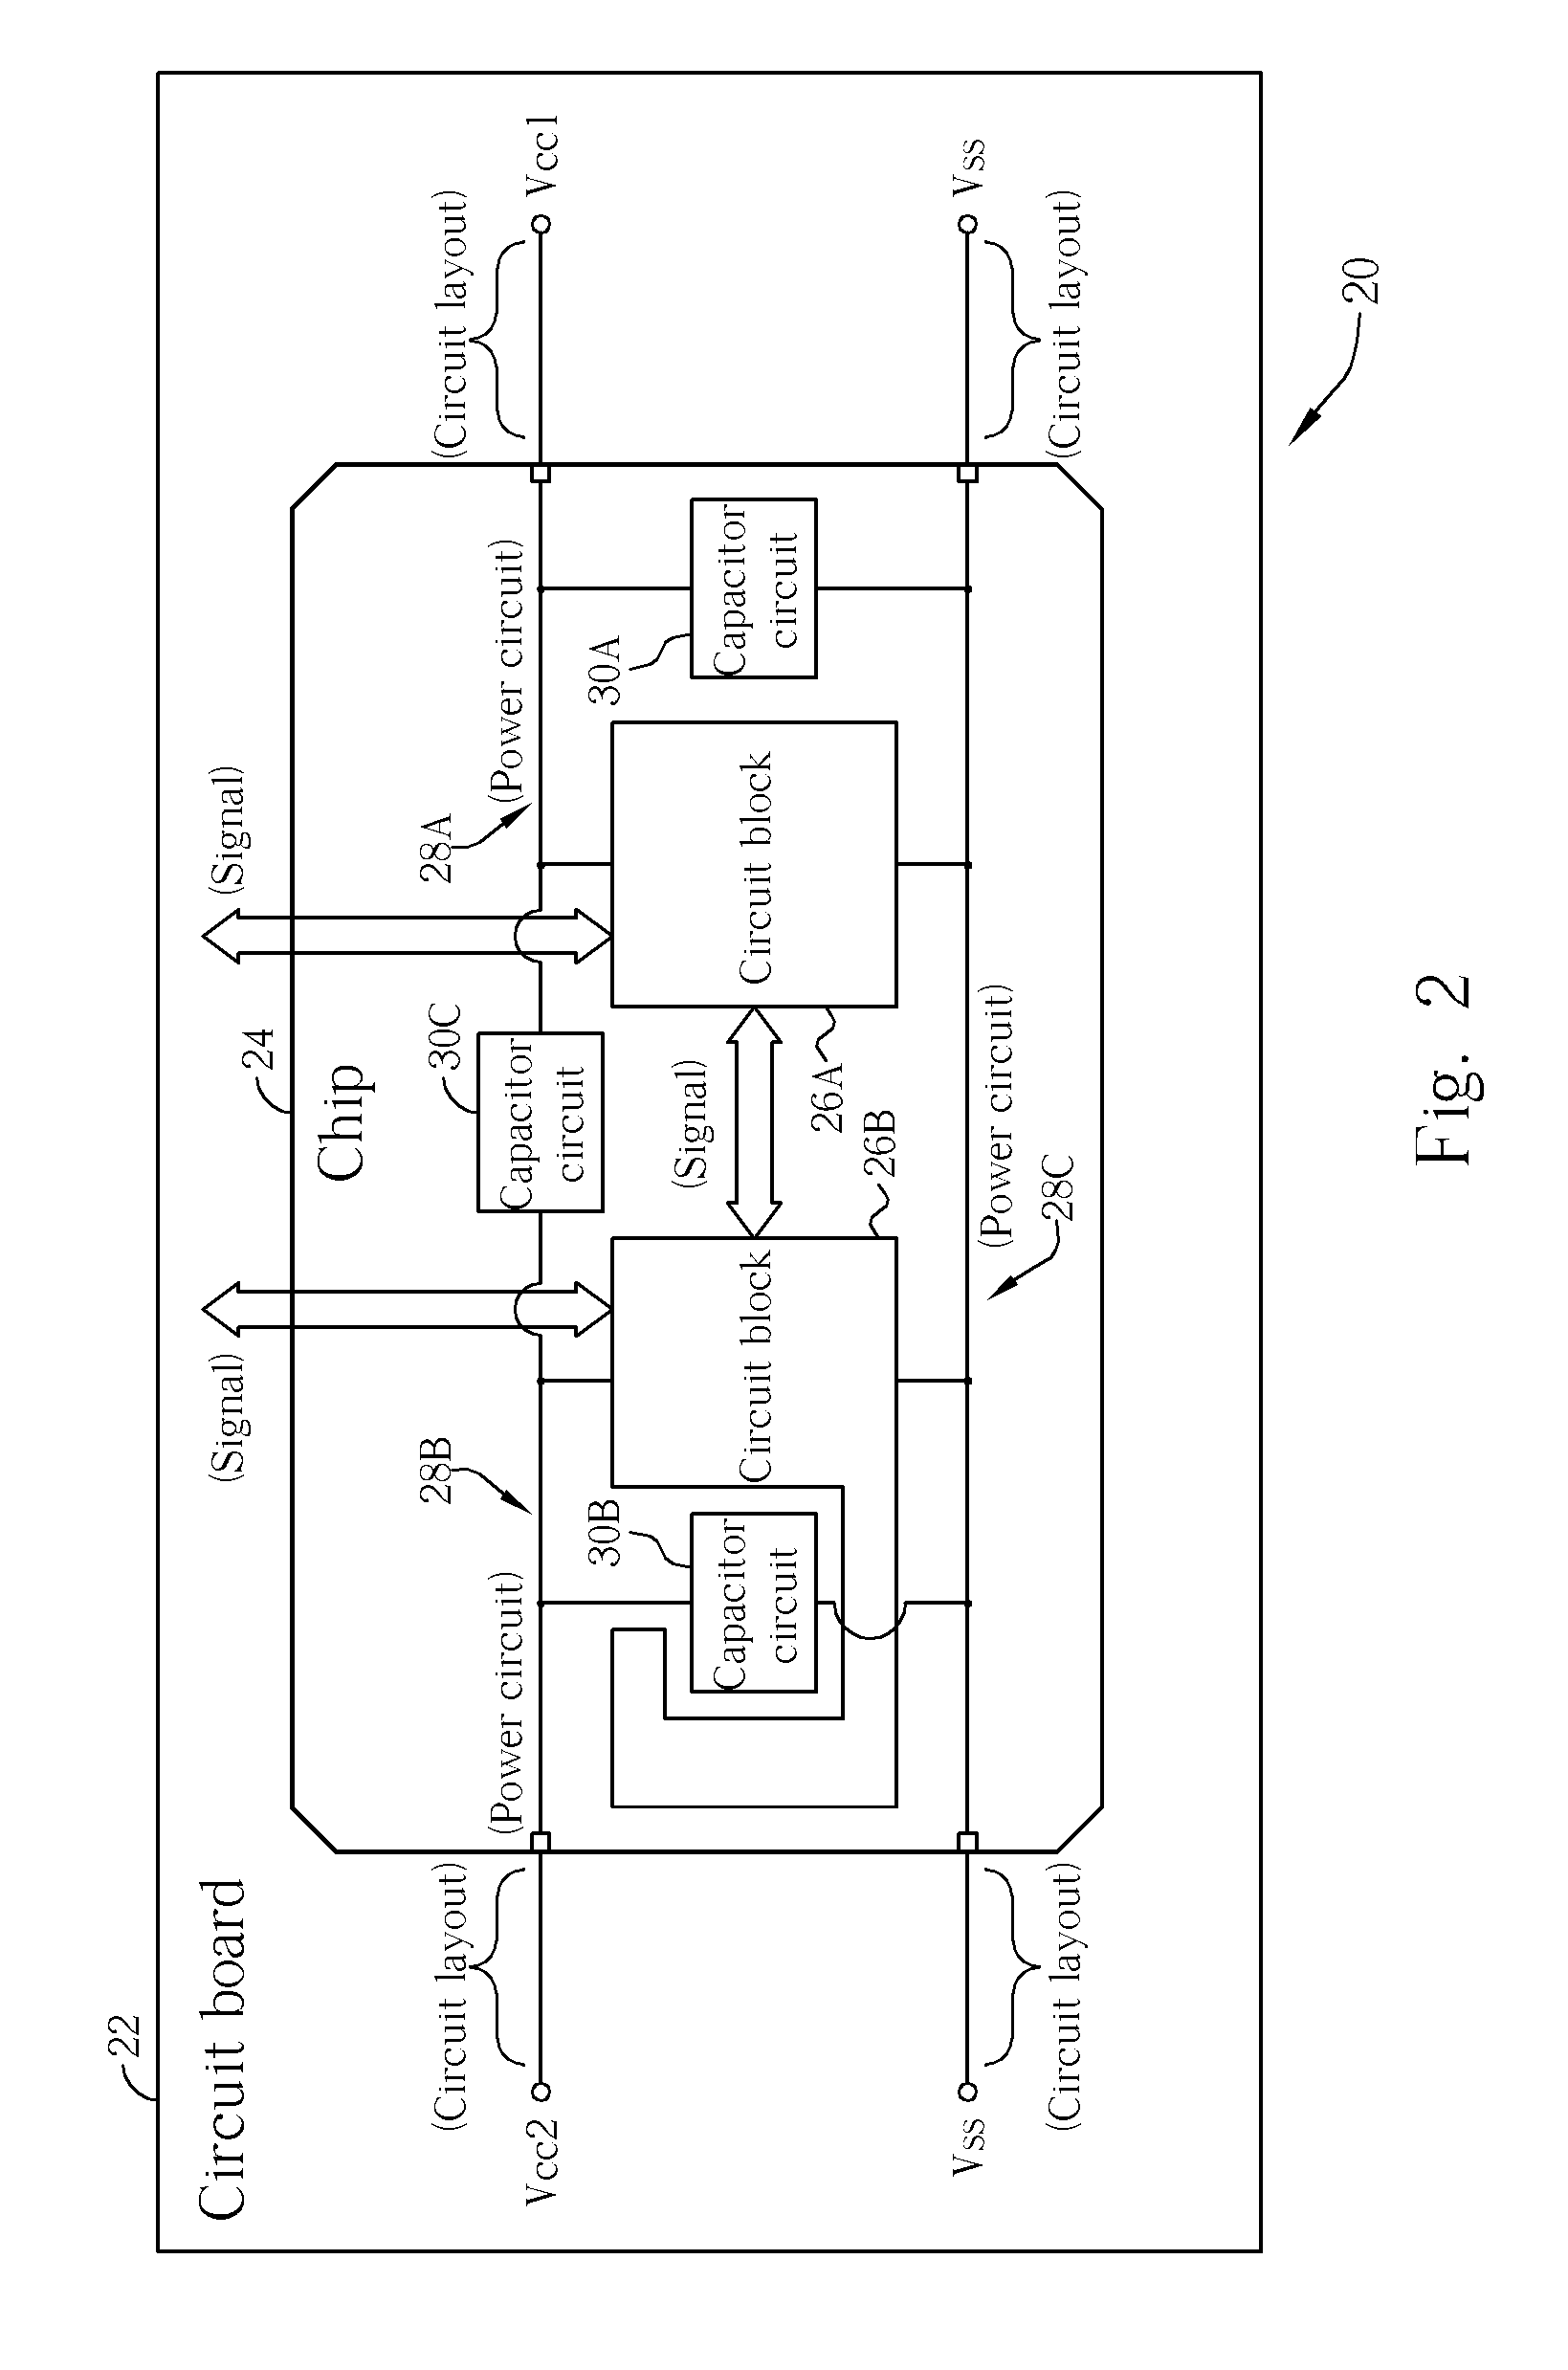 Chip with embedded electromagnetic compatibility capacitors and related method